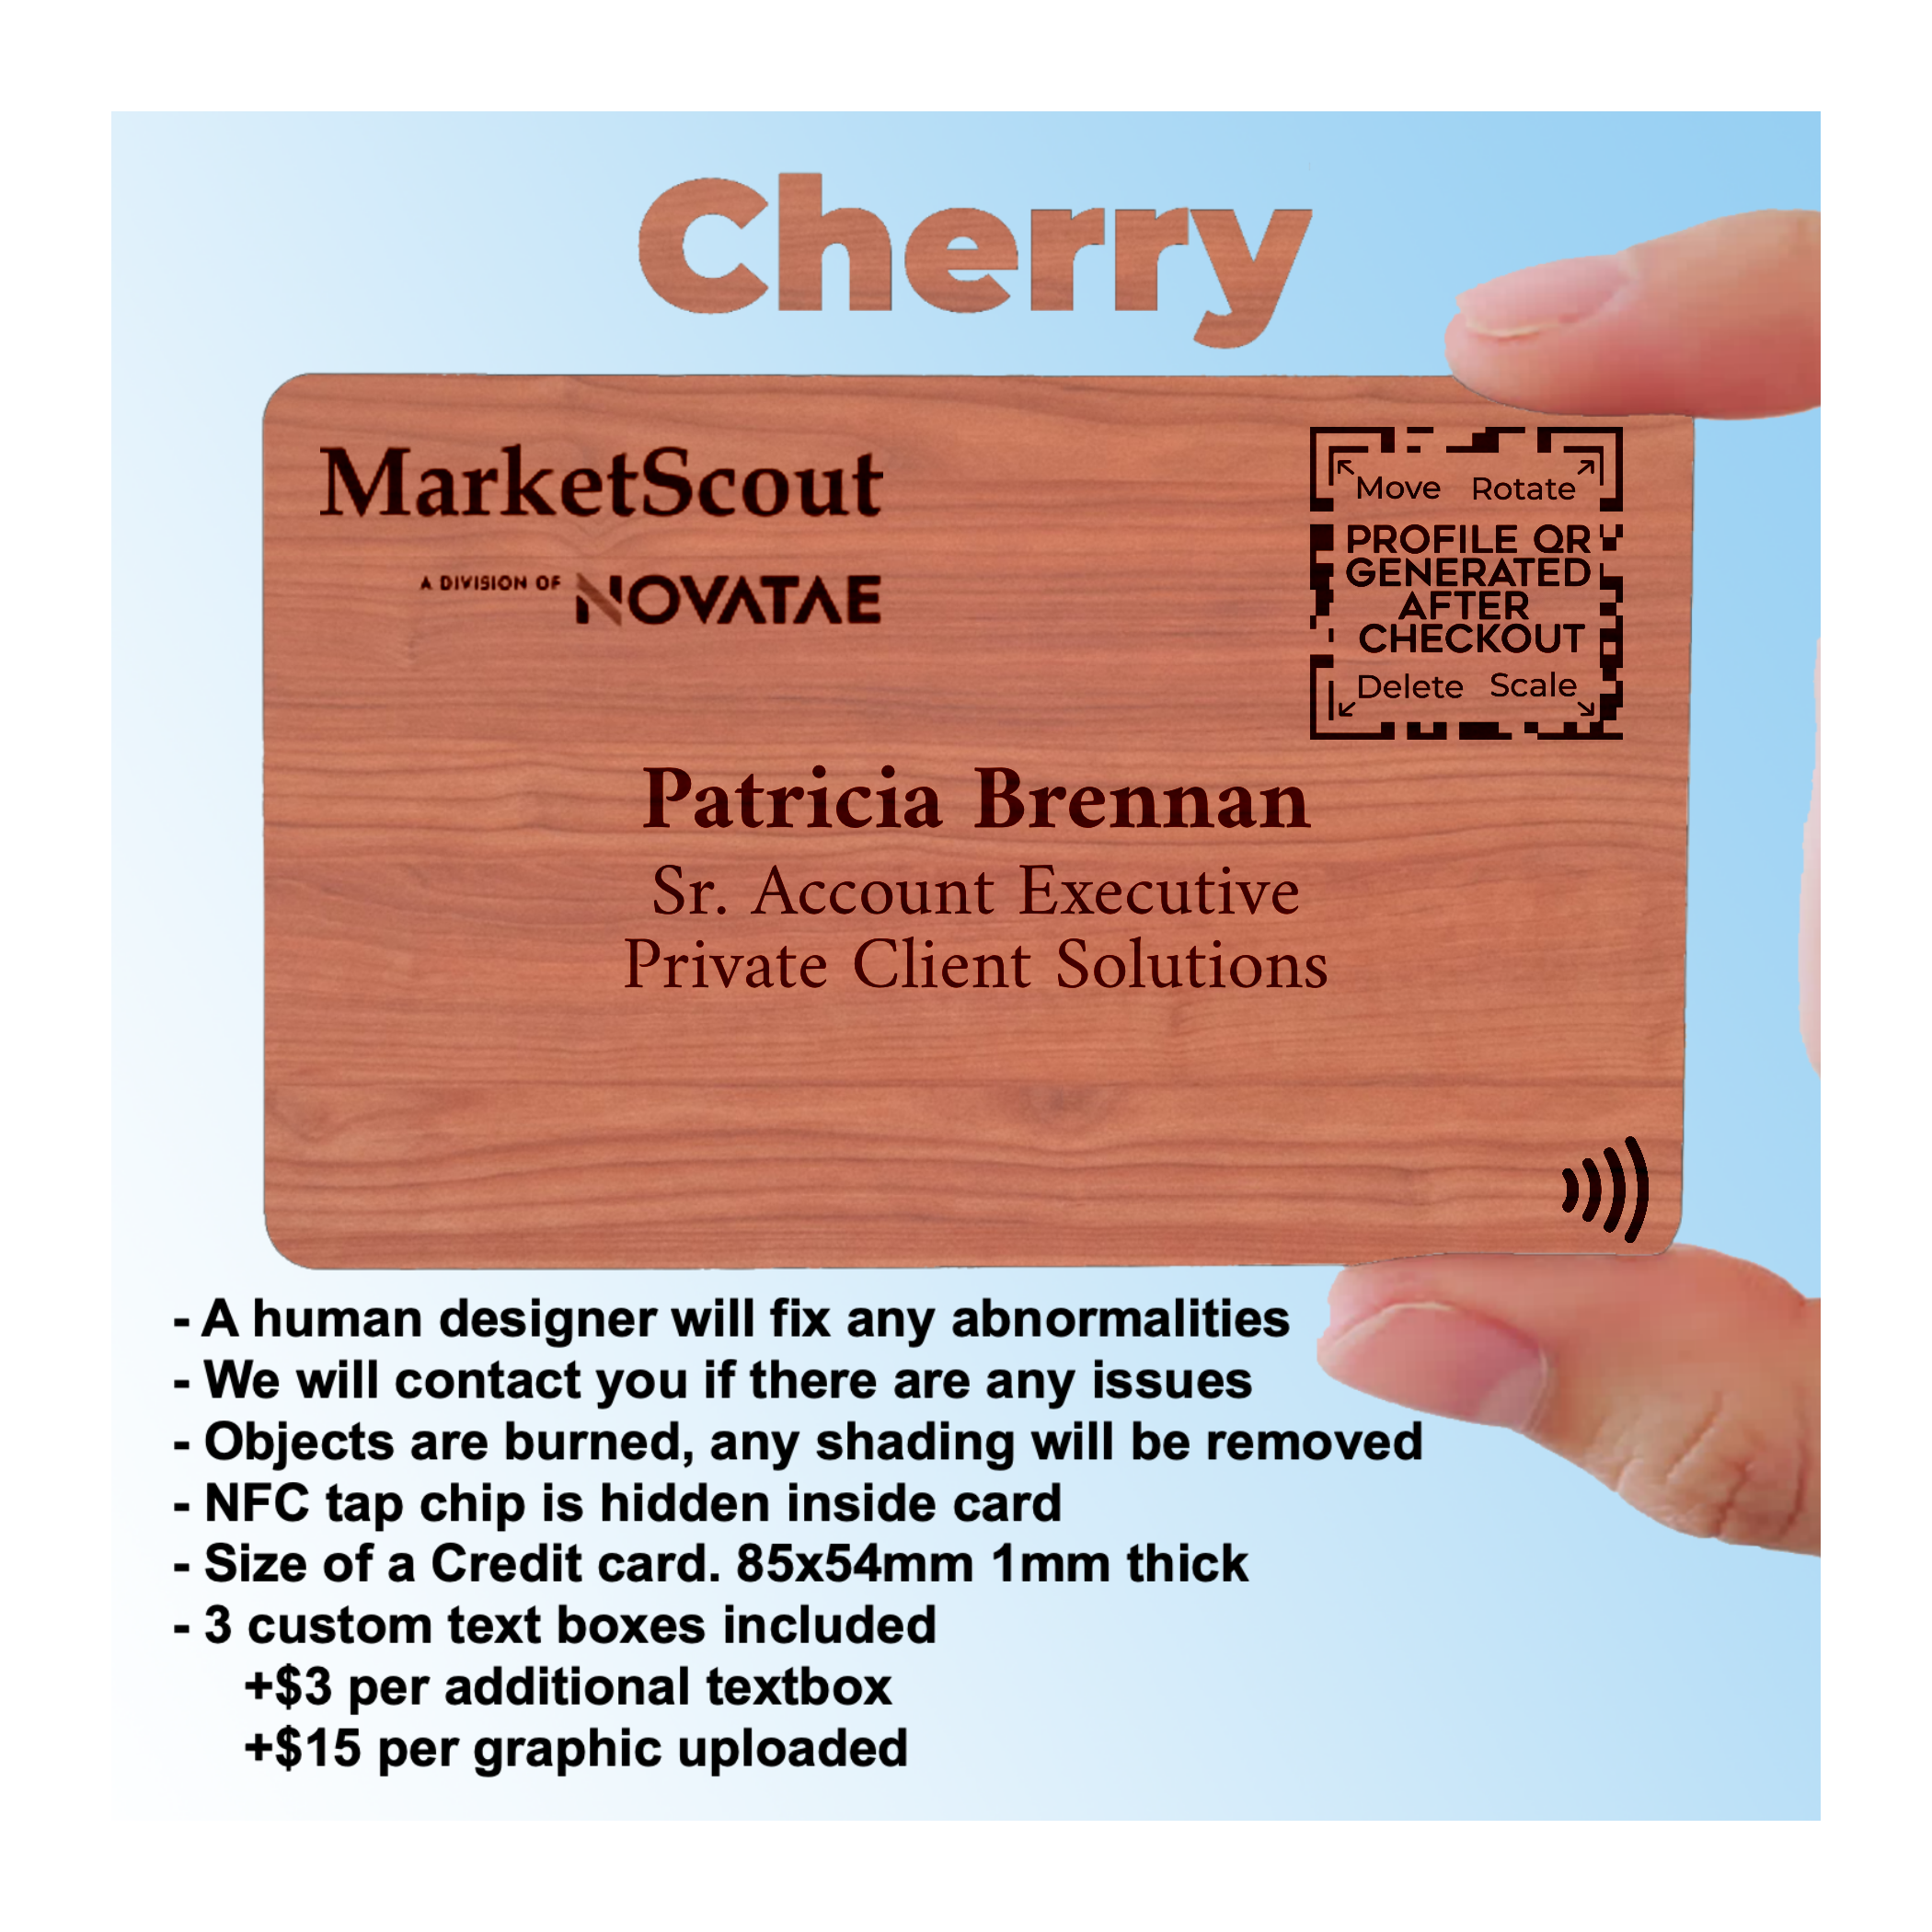 Sustainable Cherry - Tap Business card